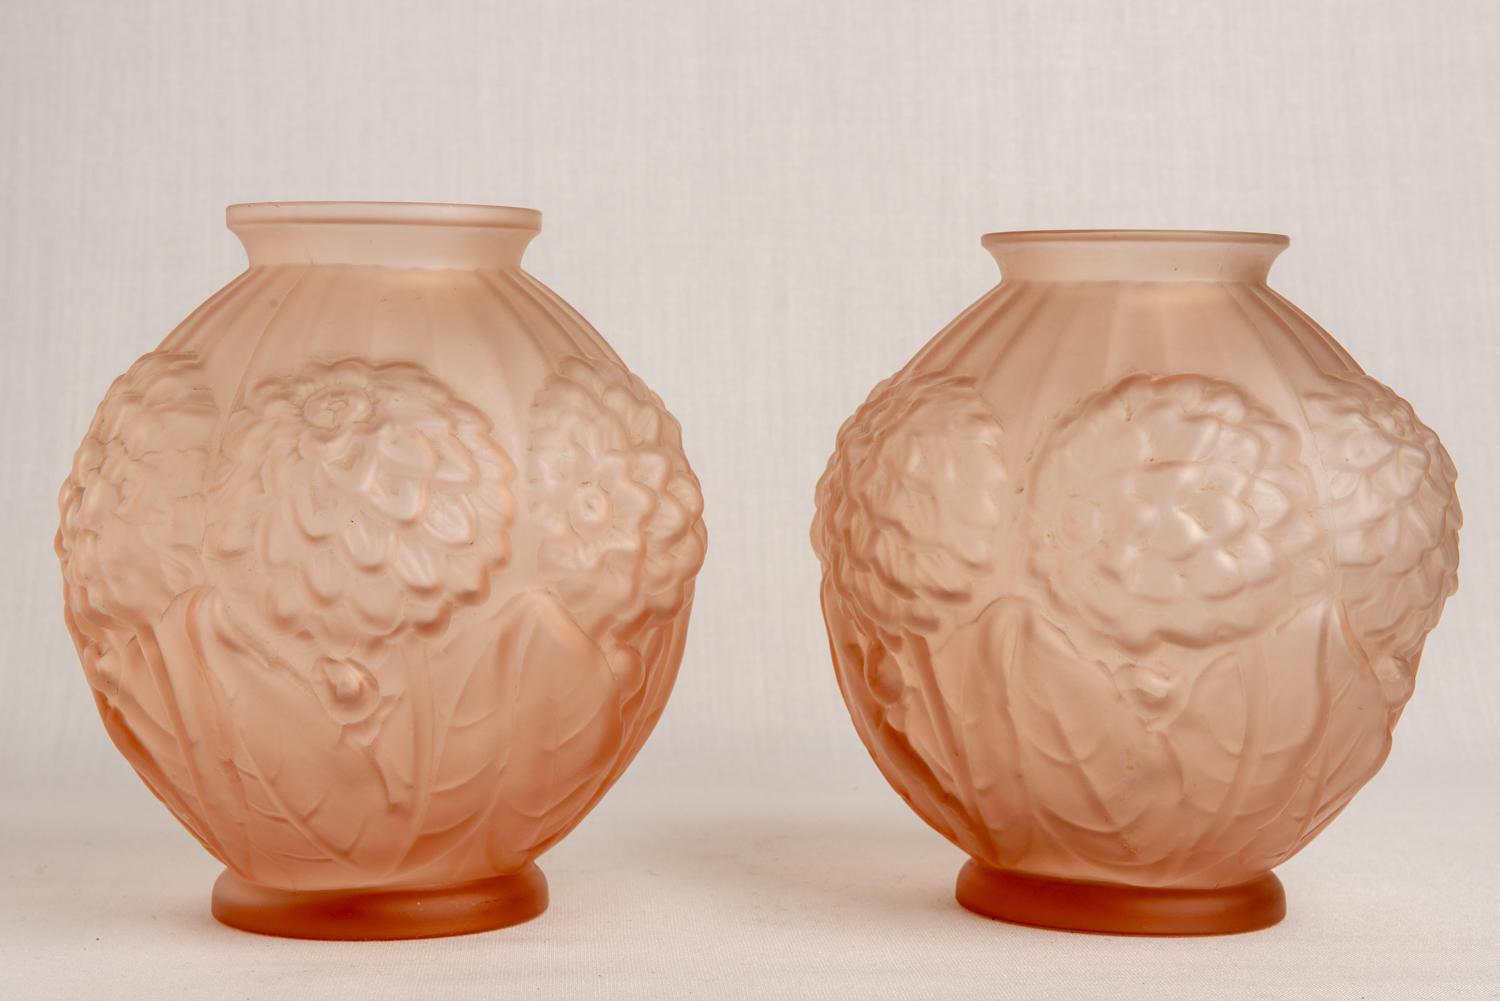 Beautiful glass pair of Deco vases in nice pink rose color - embossed with hydrangeas.
An idea for lamps also.
nr. inv. O/1587.